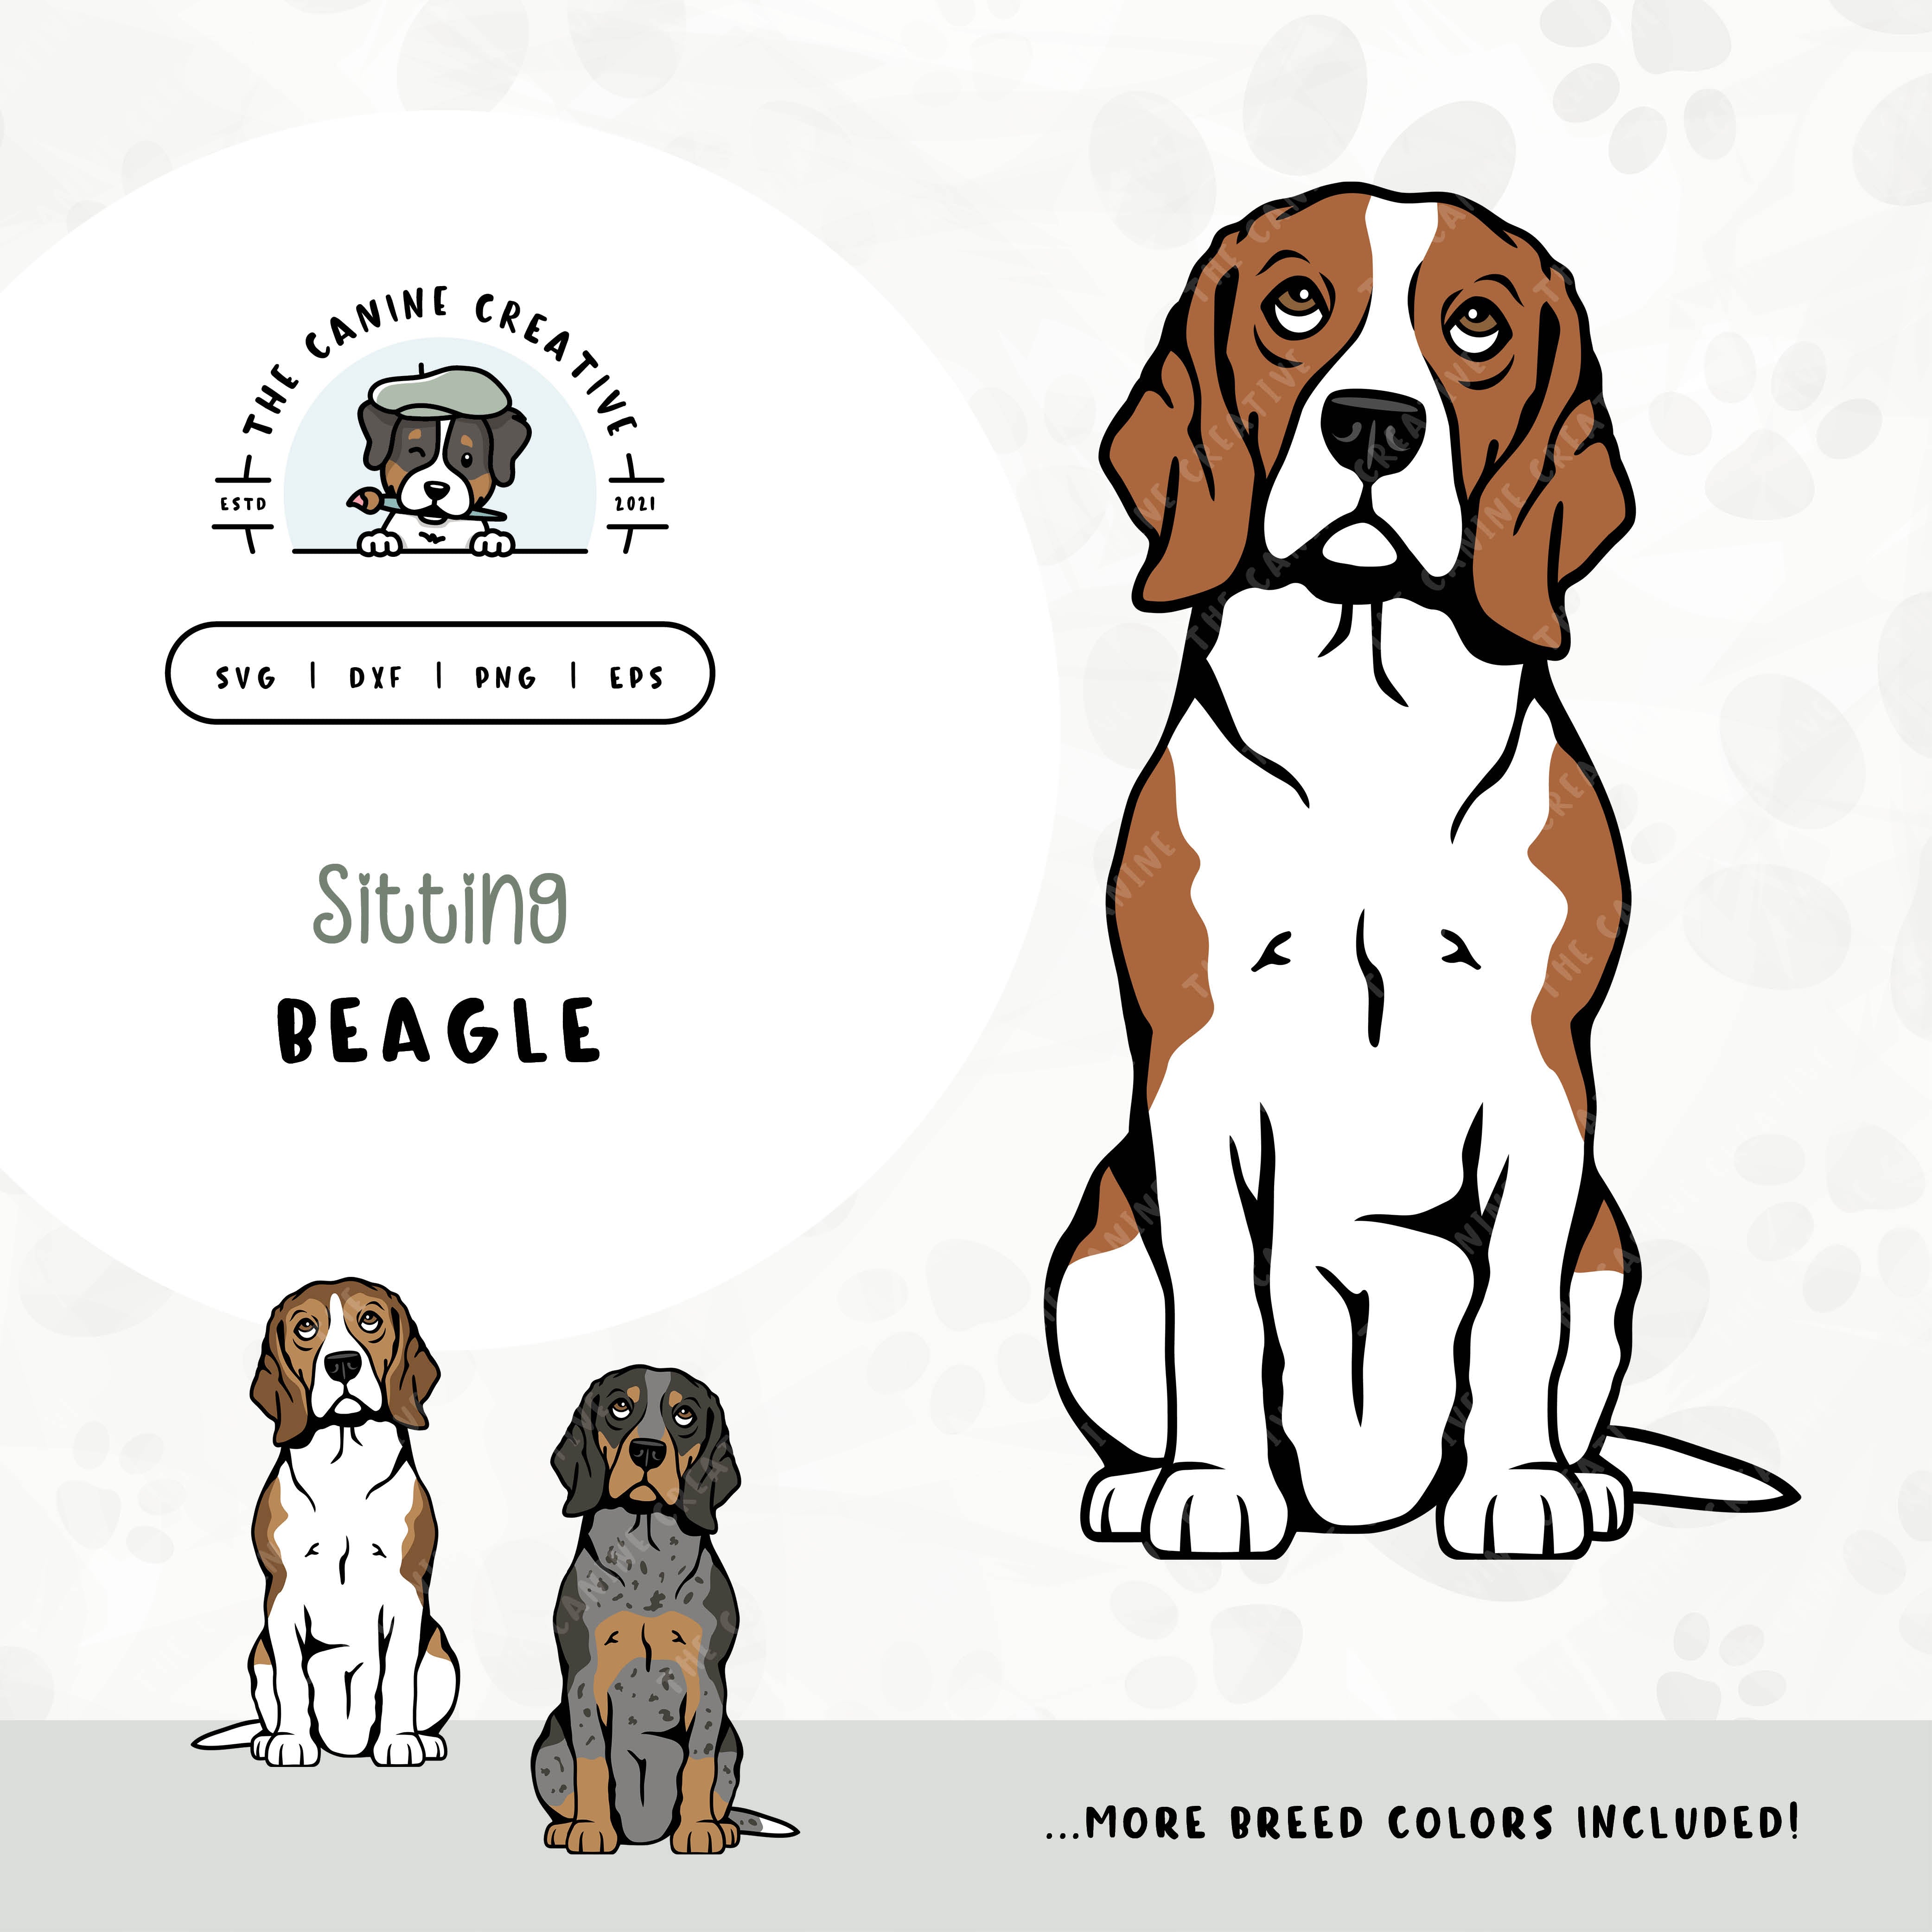 This sitting dog design features a Beagle. File formats include: SVG, DXF, PNG, and EPS.